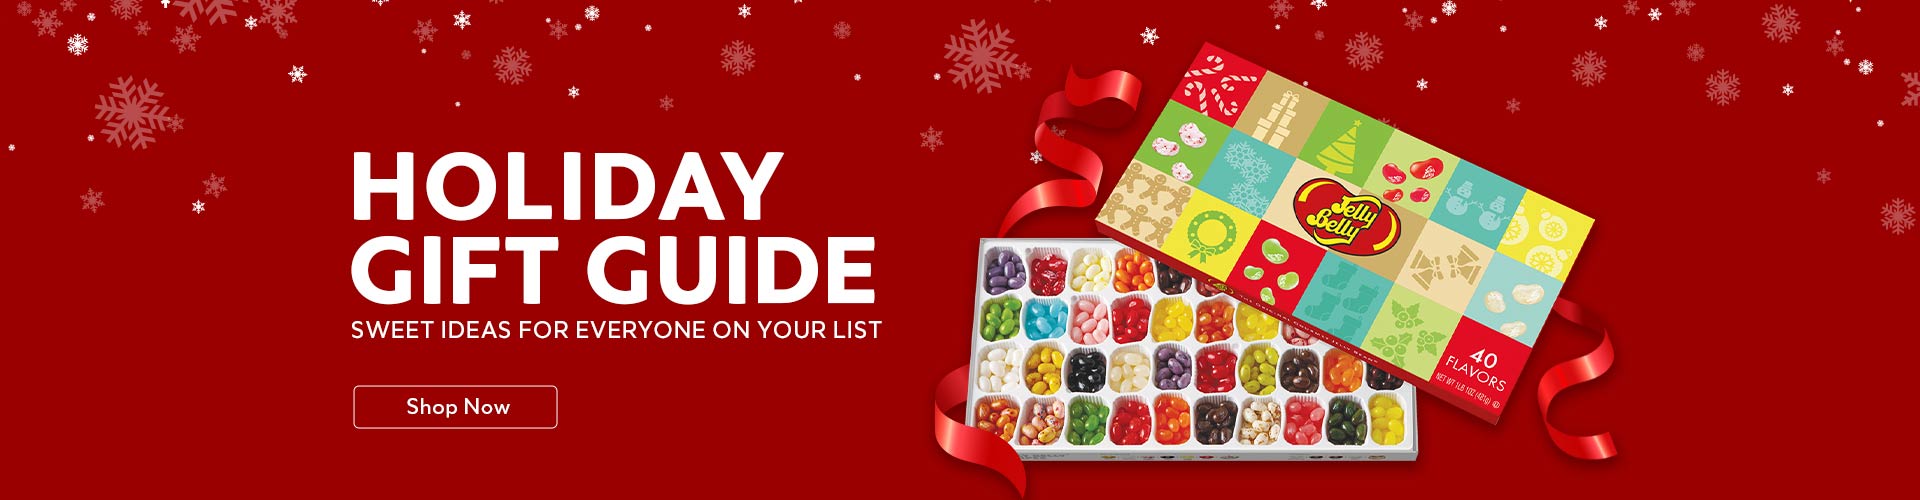 Holiday Gift Guide Sweet Ideas for Everyone on Your List